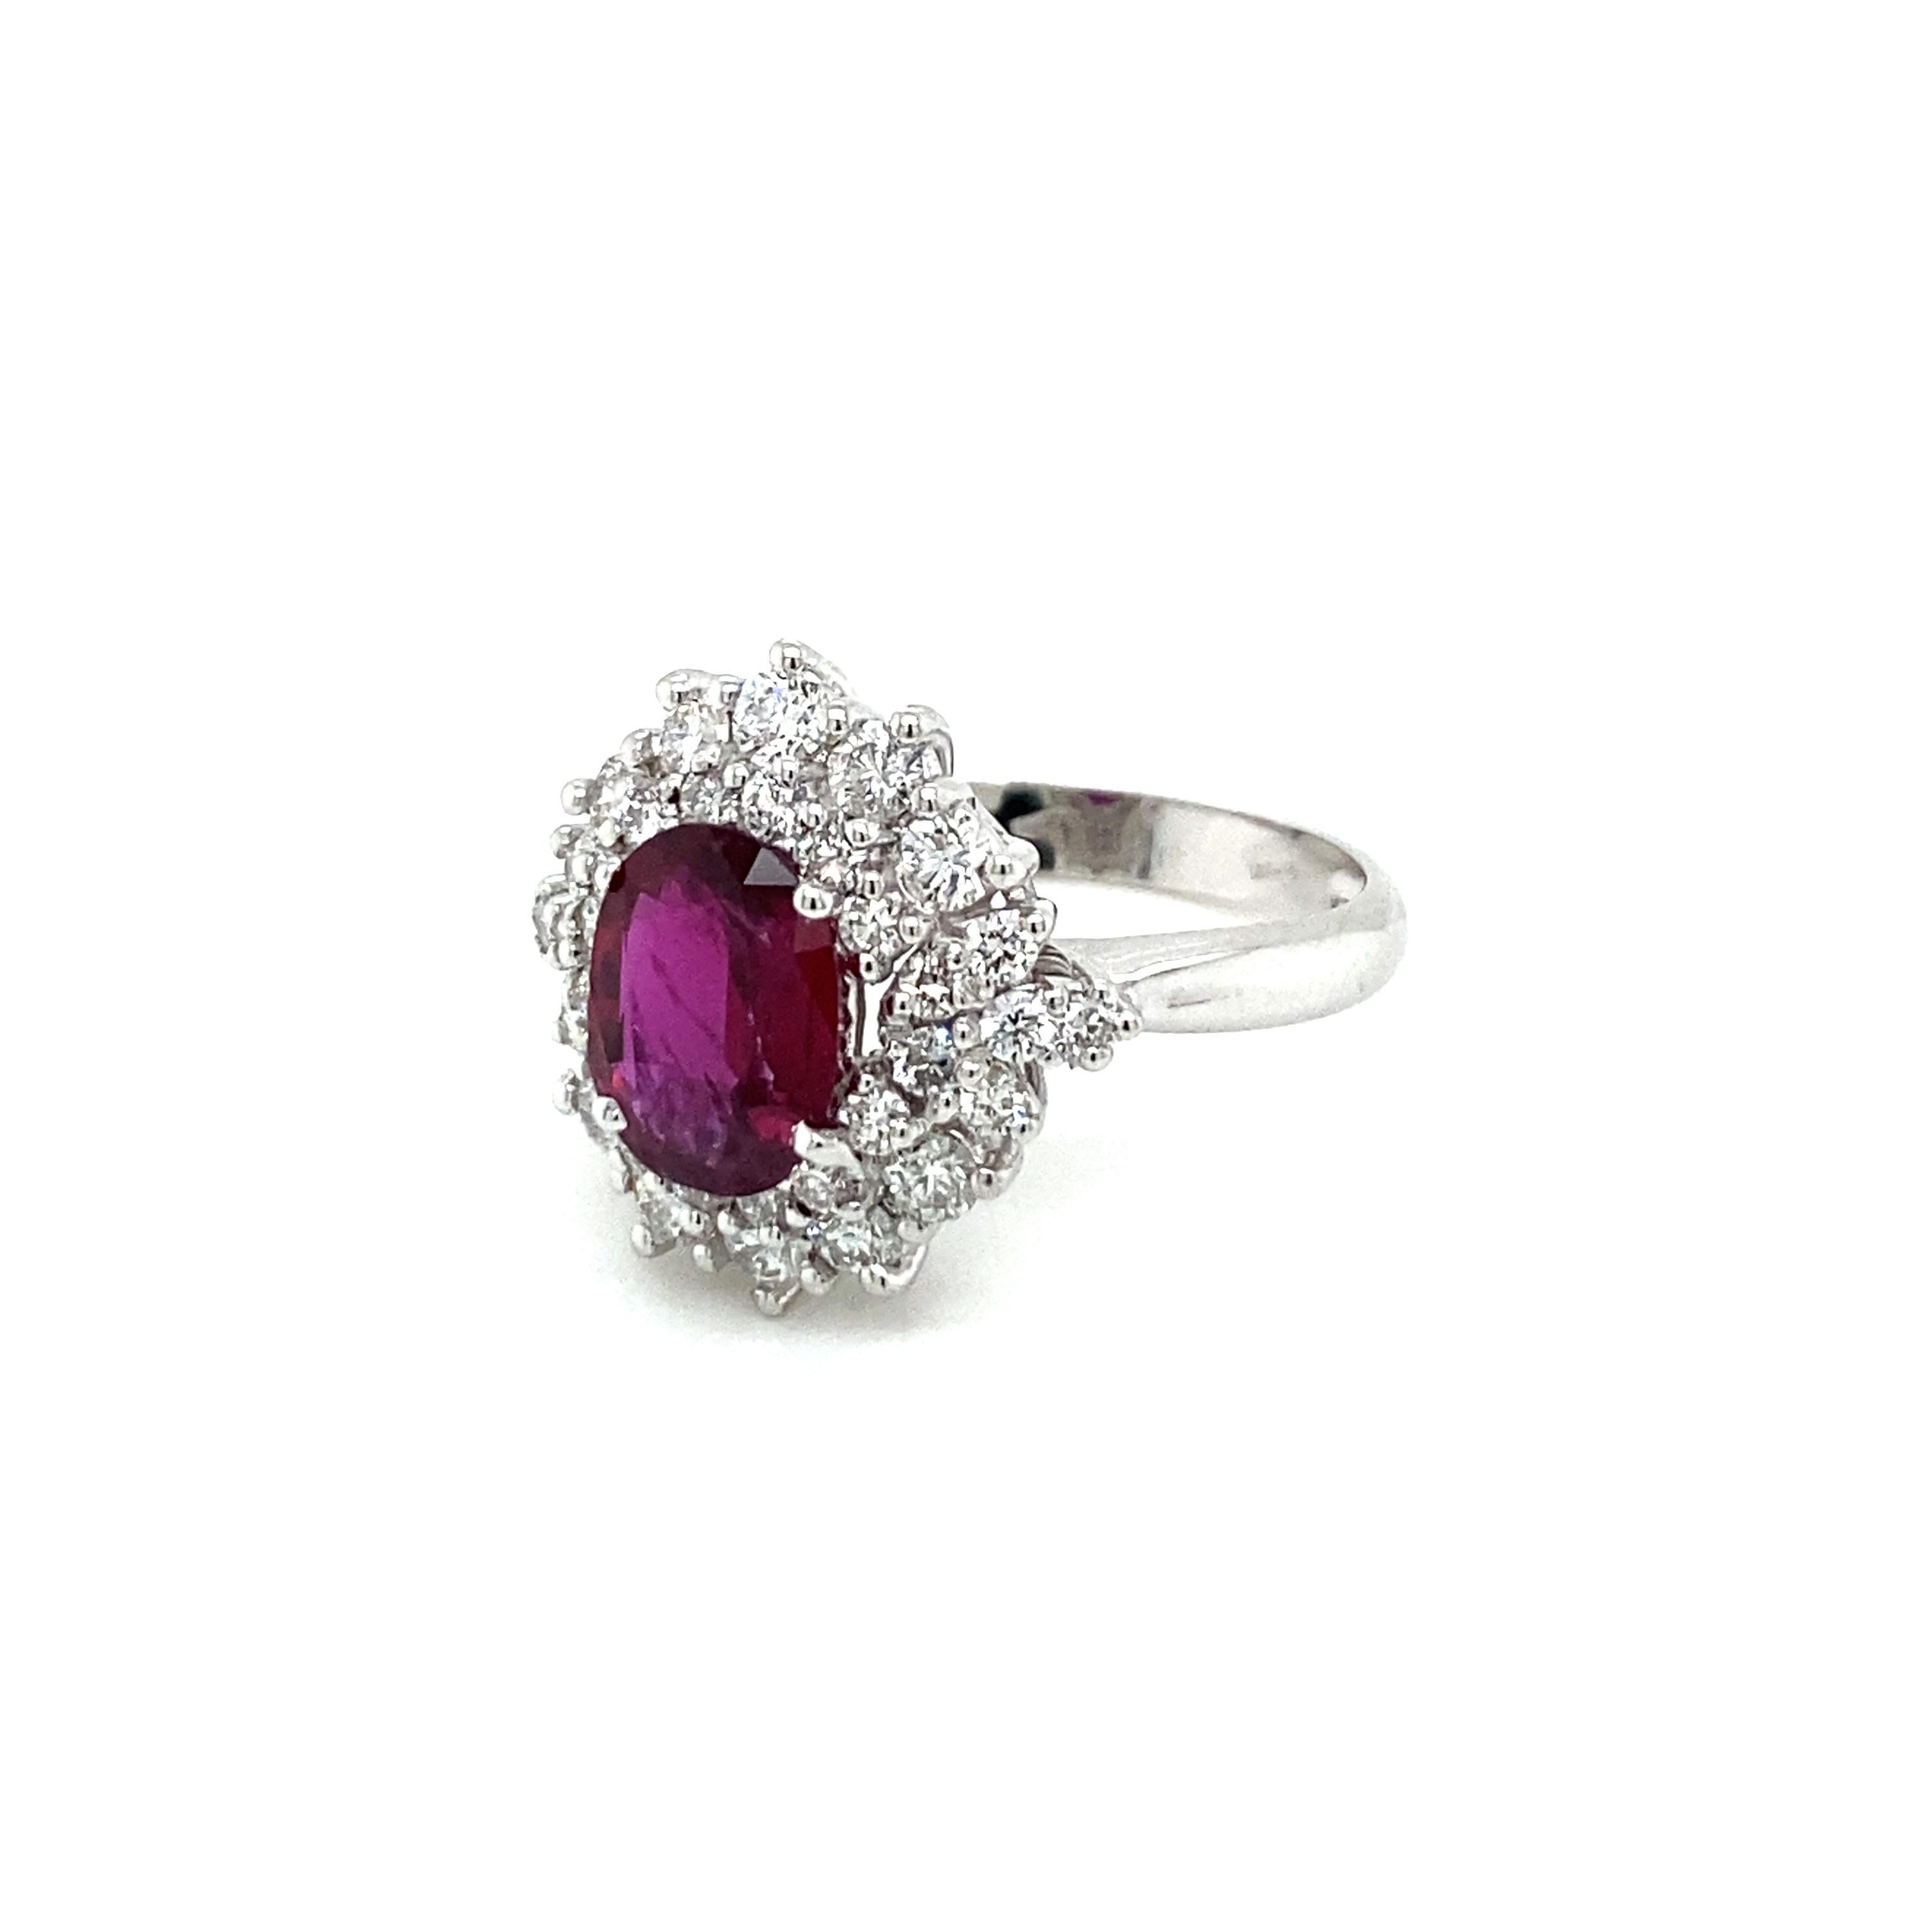 Classy and timeless, this beautiful 18k white Gold cluster ring features a 1.94 Carat oval-cut Ruby, origin Thailand, with a vibrant and rich purplish red color flanked by a double halo composed of sparkling Round Brilliant cut Diamonds for a total